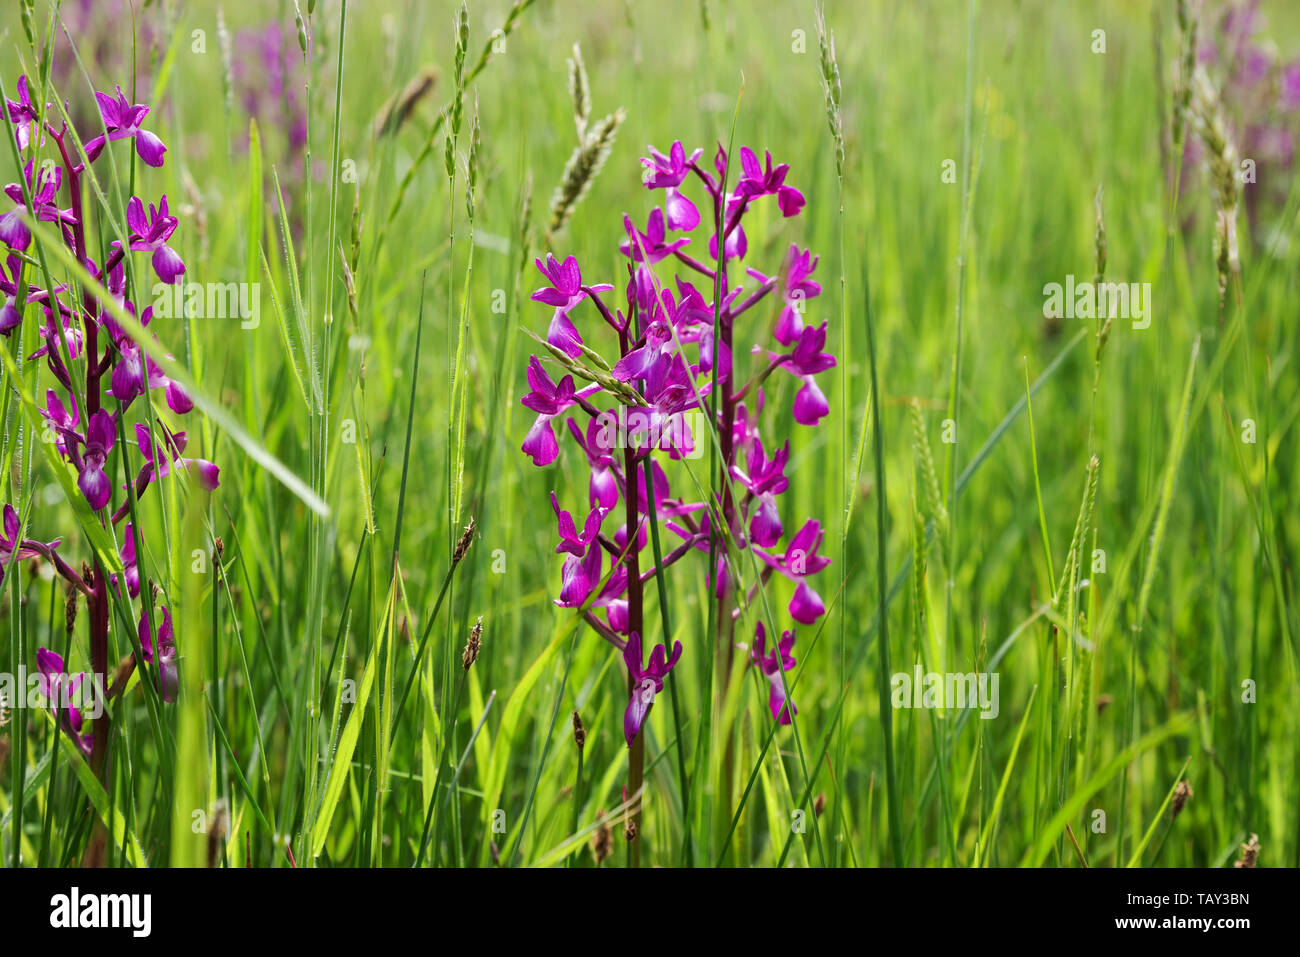 Striking Anacamptis laxiflora (loose-flowered orchid) flowering in Les Vicheries orchid fields in Guernsey, Channel Islands Stock Photo